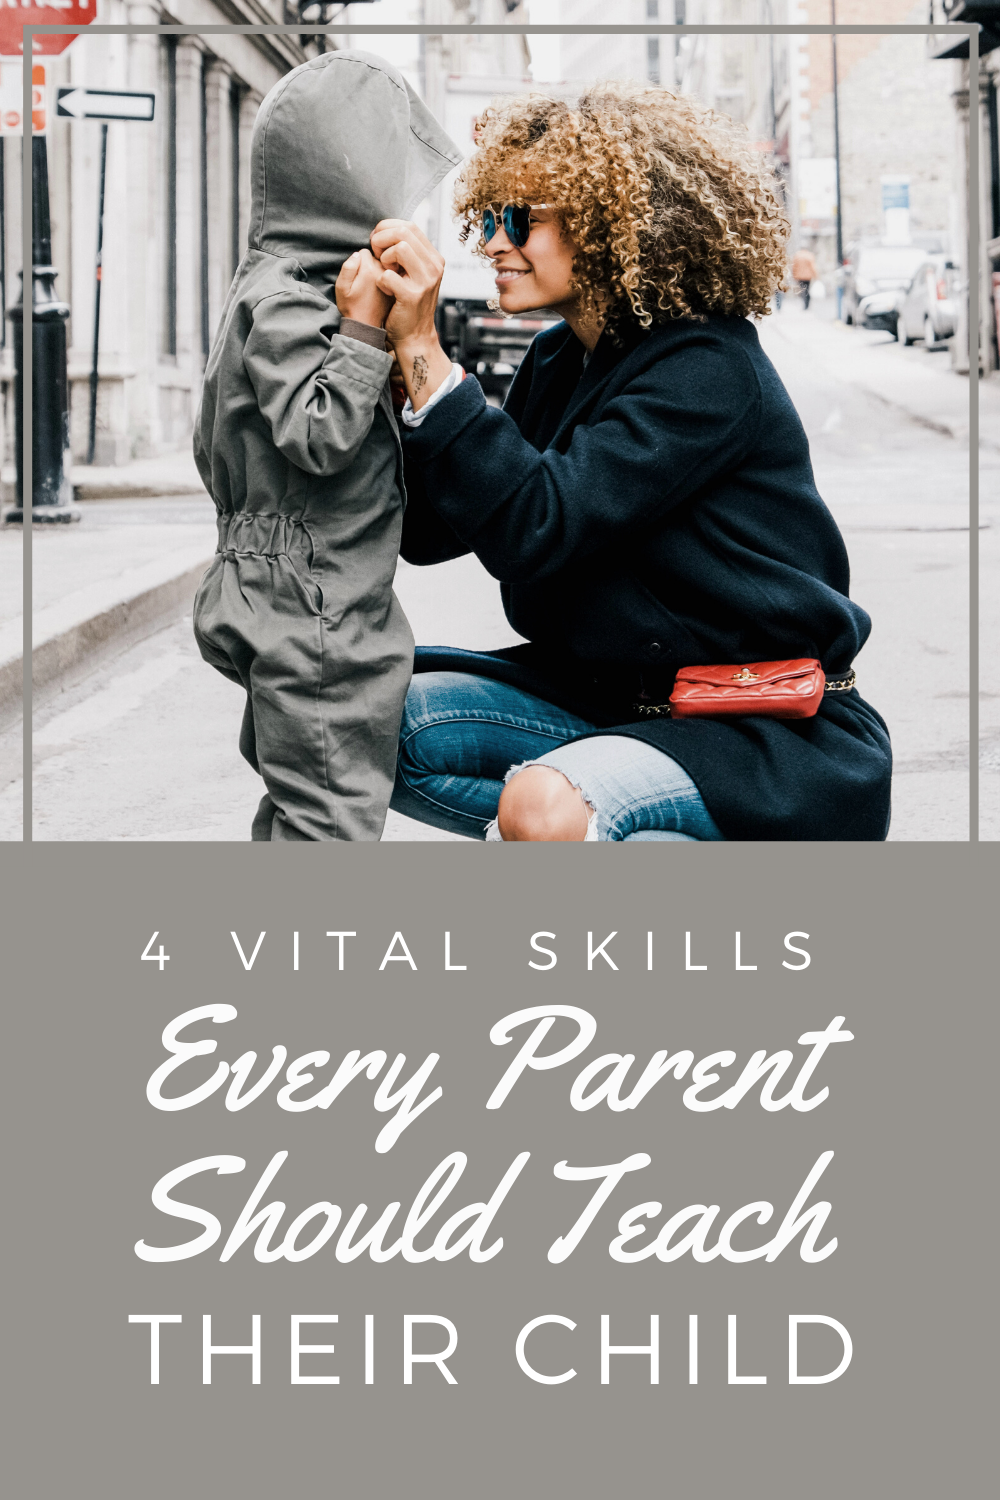 Woman kneels down to the same height as her son and smiles. This article covers 4 vital skills every parent should teach their child.